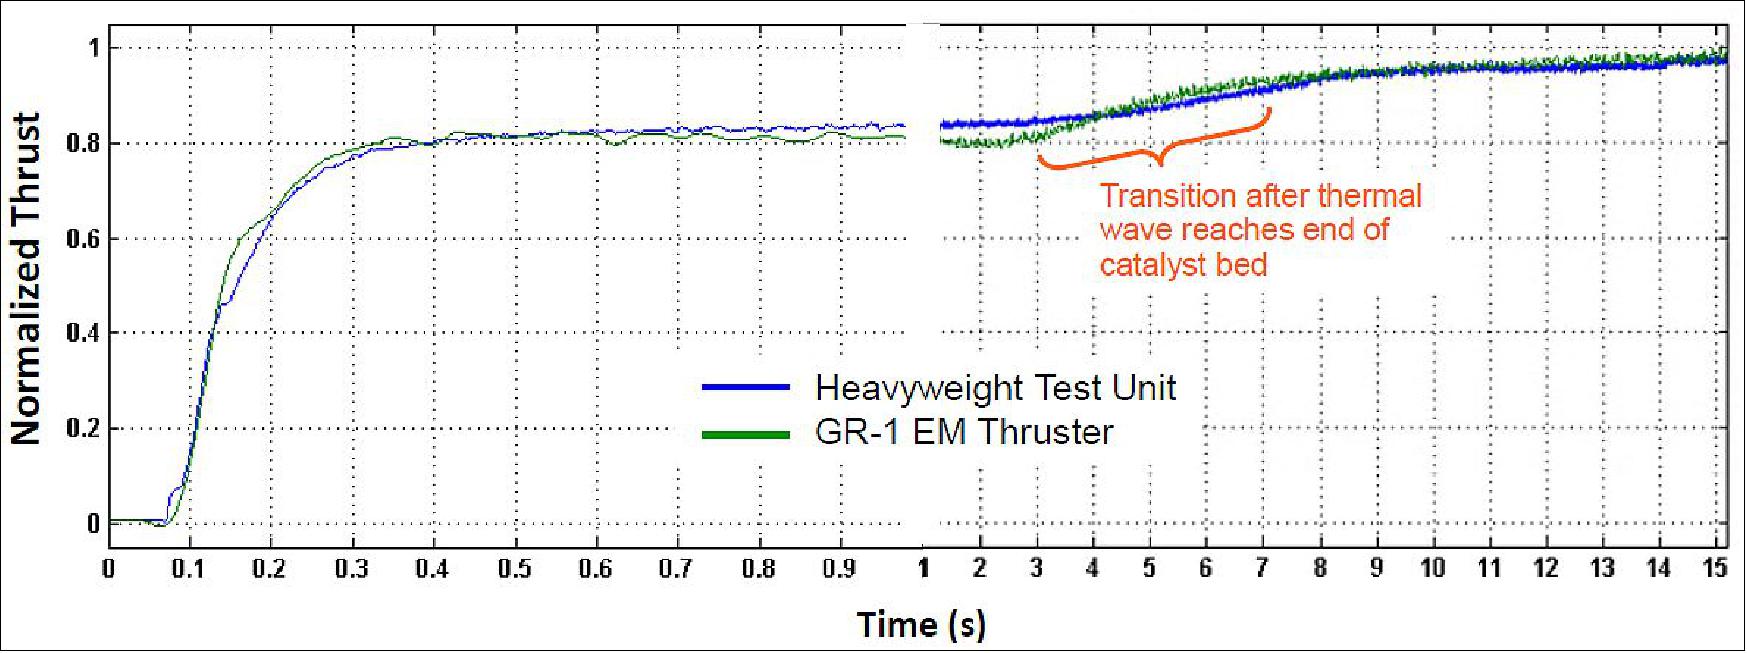 Figure 8: Comparison of normalized start-up thrust traces for GR-1 prototype and heavyweight test article (image credit: Aerojet Rocketdyne)